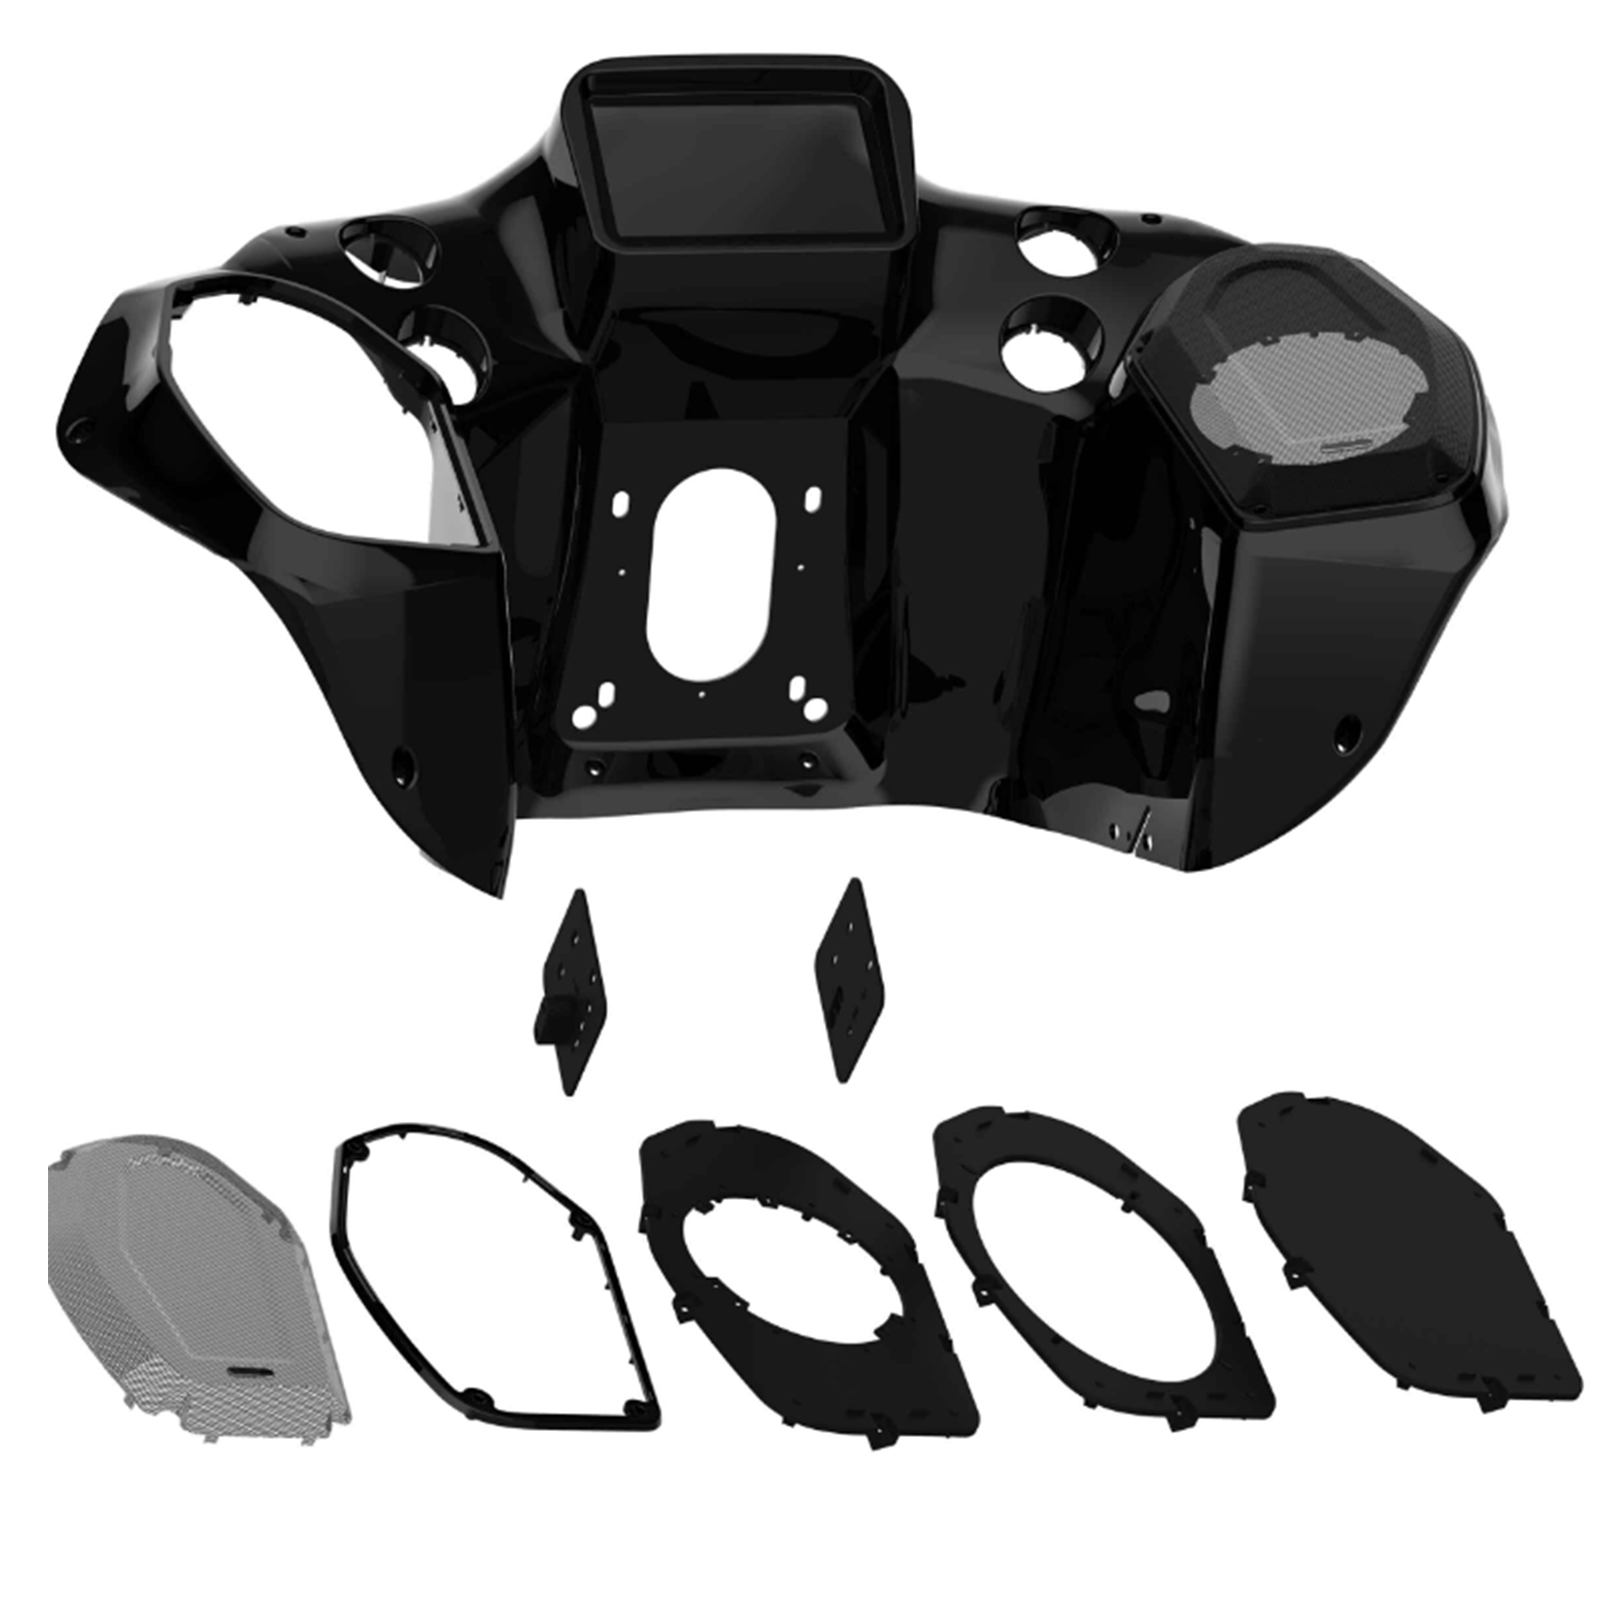 Metra 95-HDIF2 Replacement Inner Fairing ISO Double DIN Radio Installation Kit - Fits 1998-2013 Harley-Davidson Roadglide (FLT/S